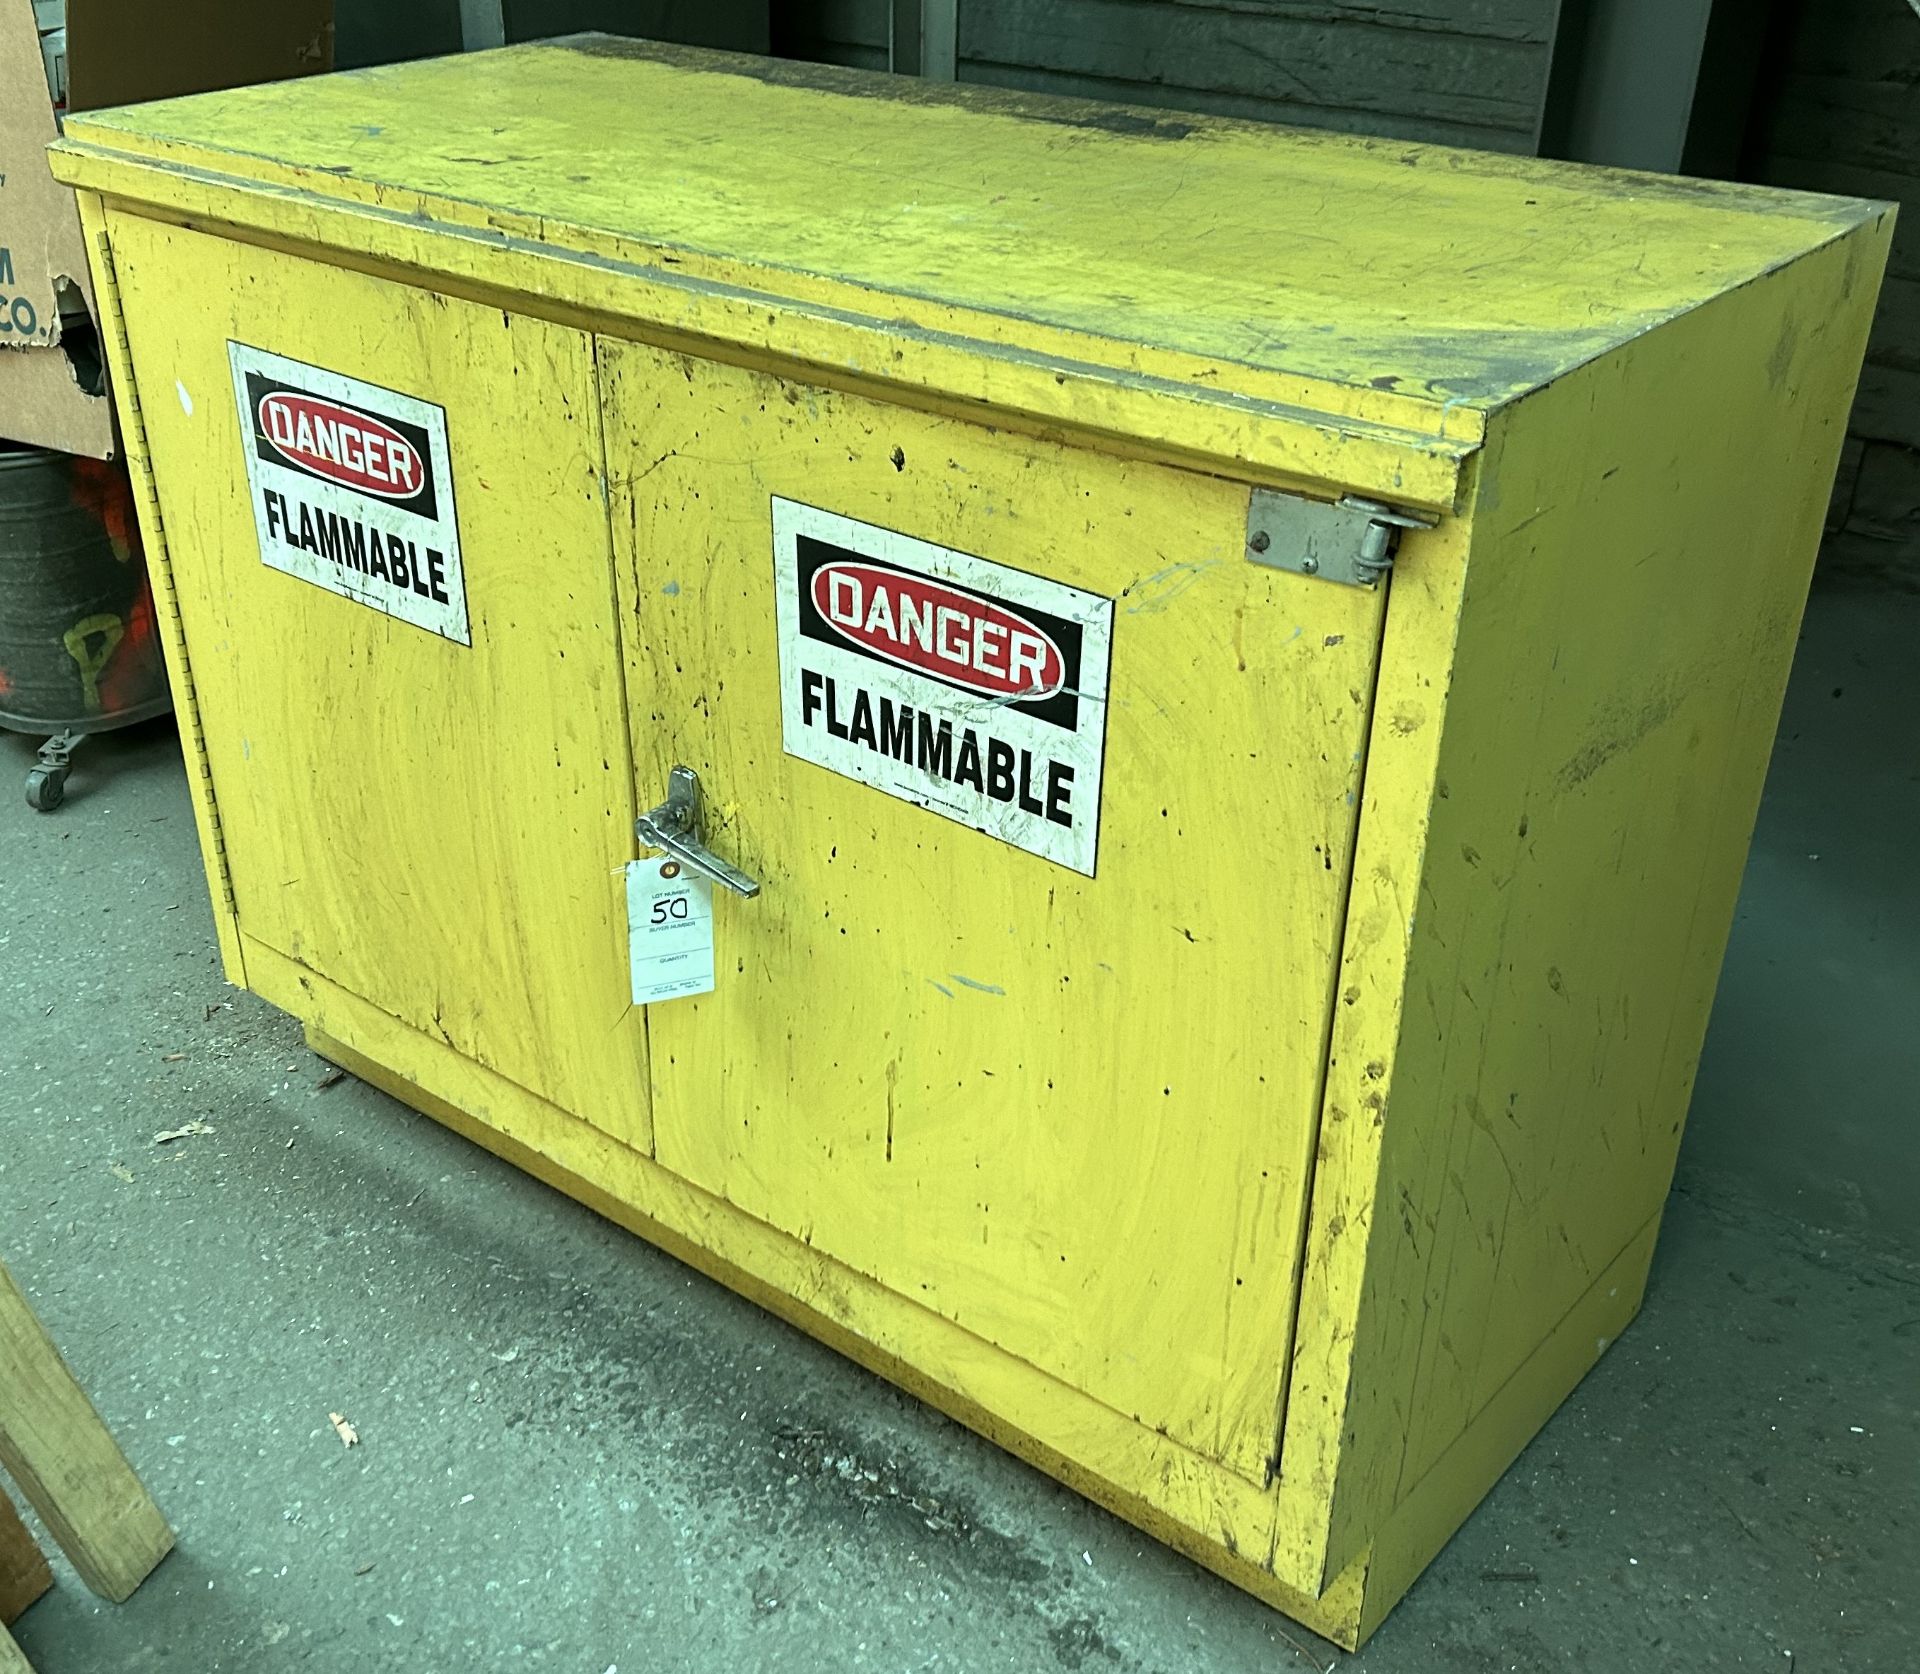 2 Dr. 47"L x 23"W x 36"H Flammable Safety Cabinet